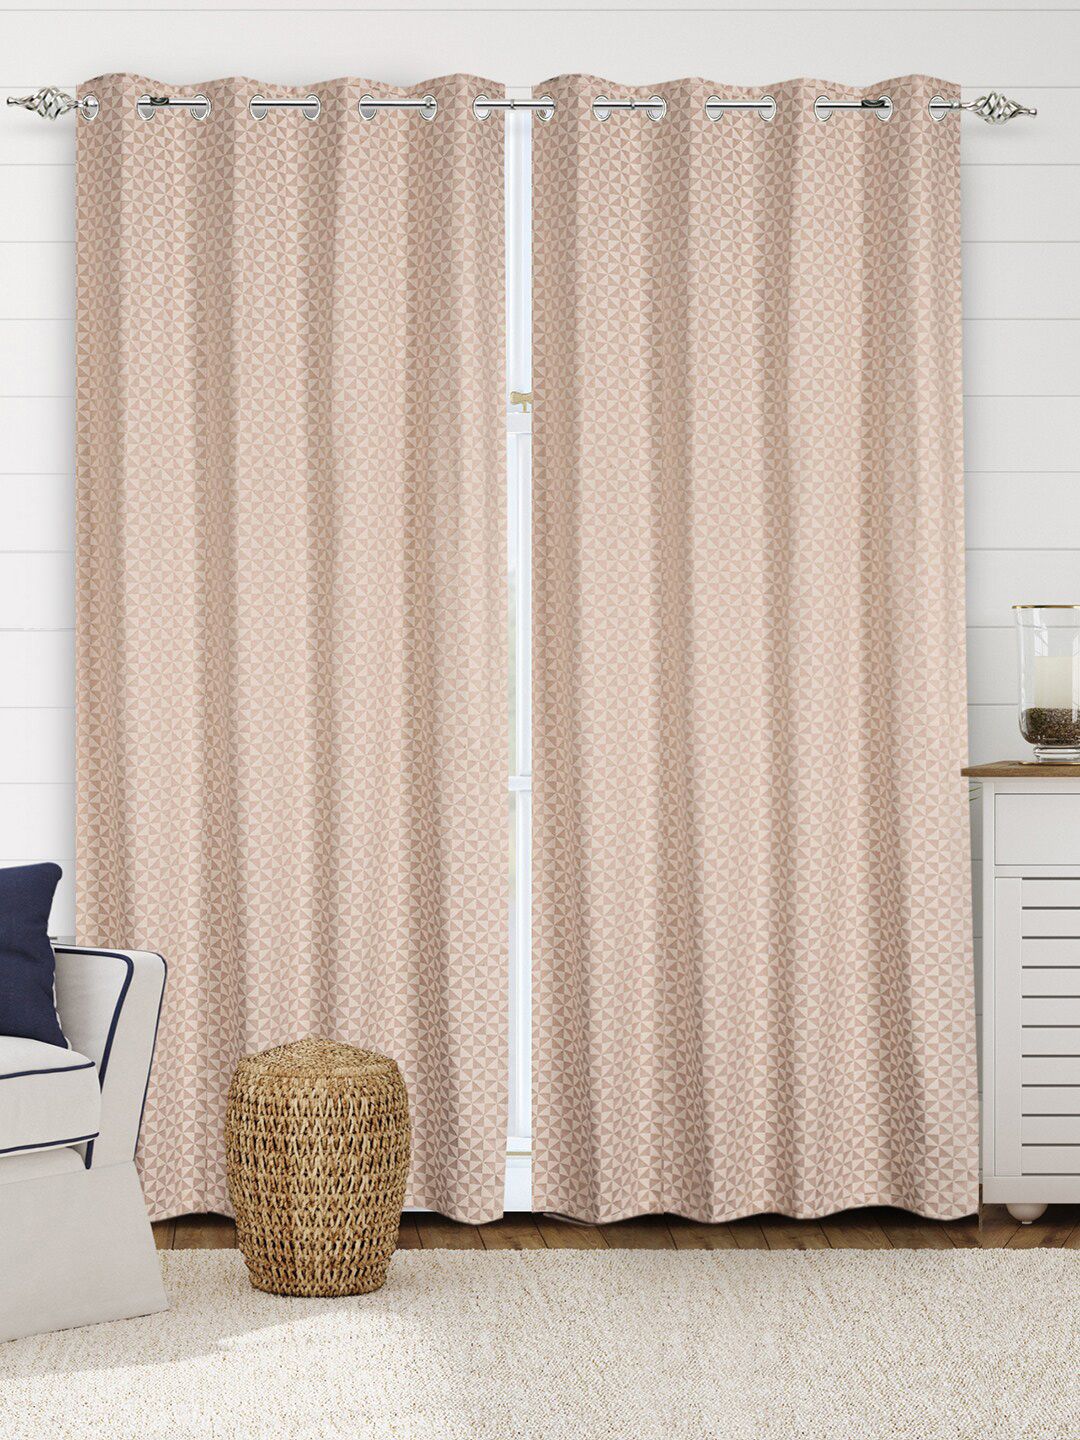 Saral Home Beige & Tan Set of 2 Black Out Door Curtain Price in India